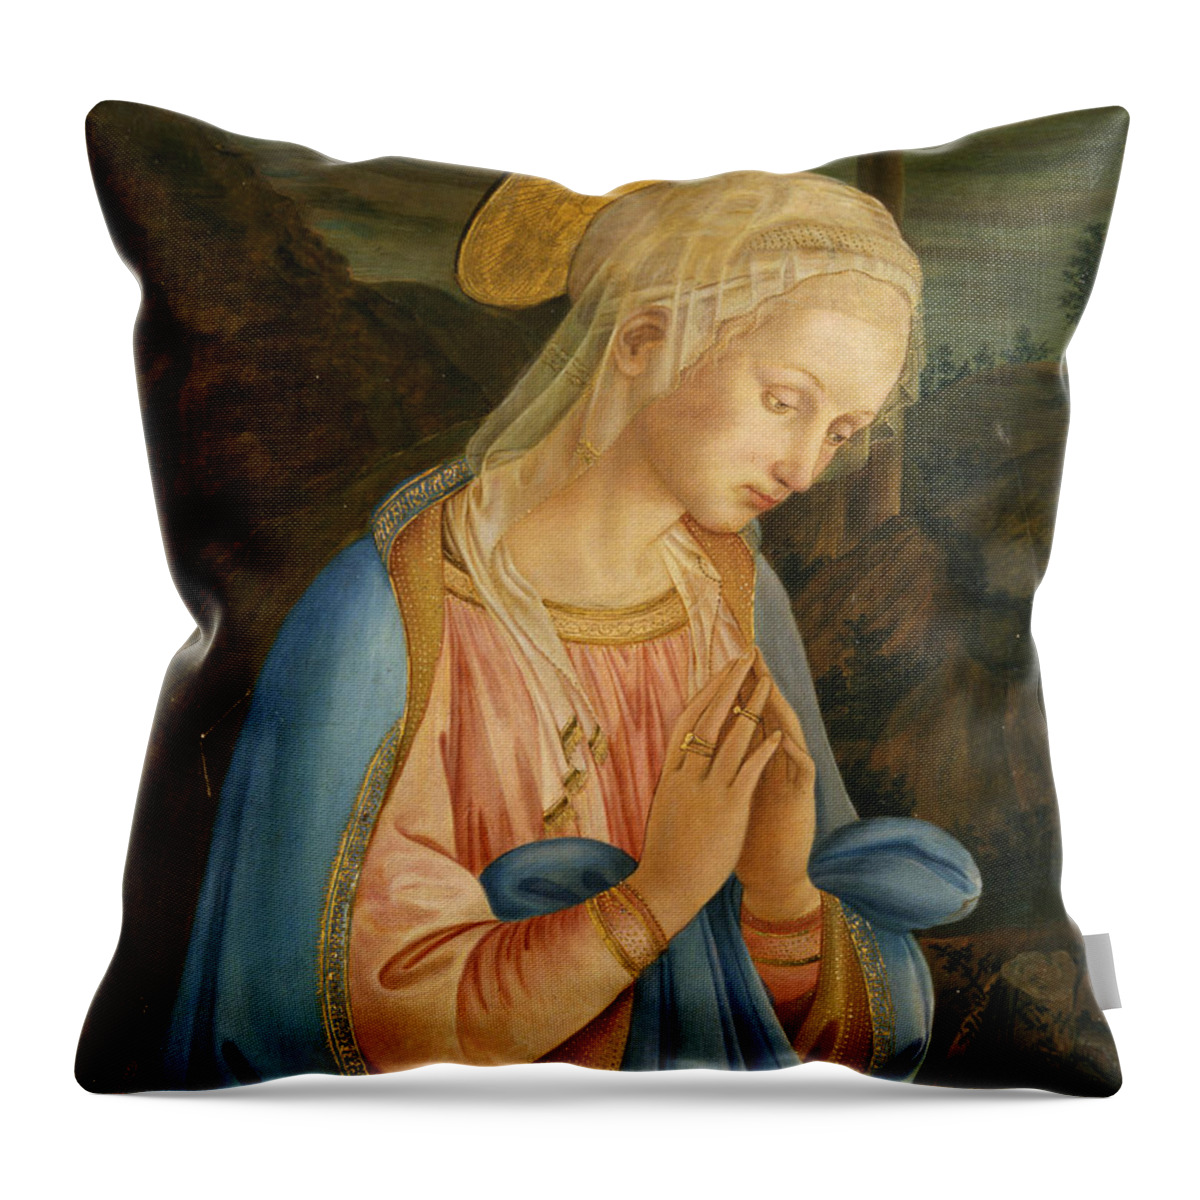 Massimo Diodato Throw Pillow featuring the painting Praying Virgin by Massimo Diodato